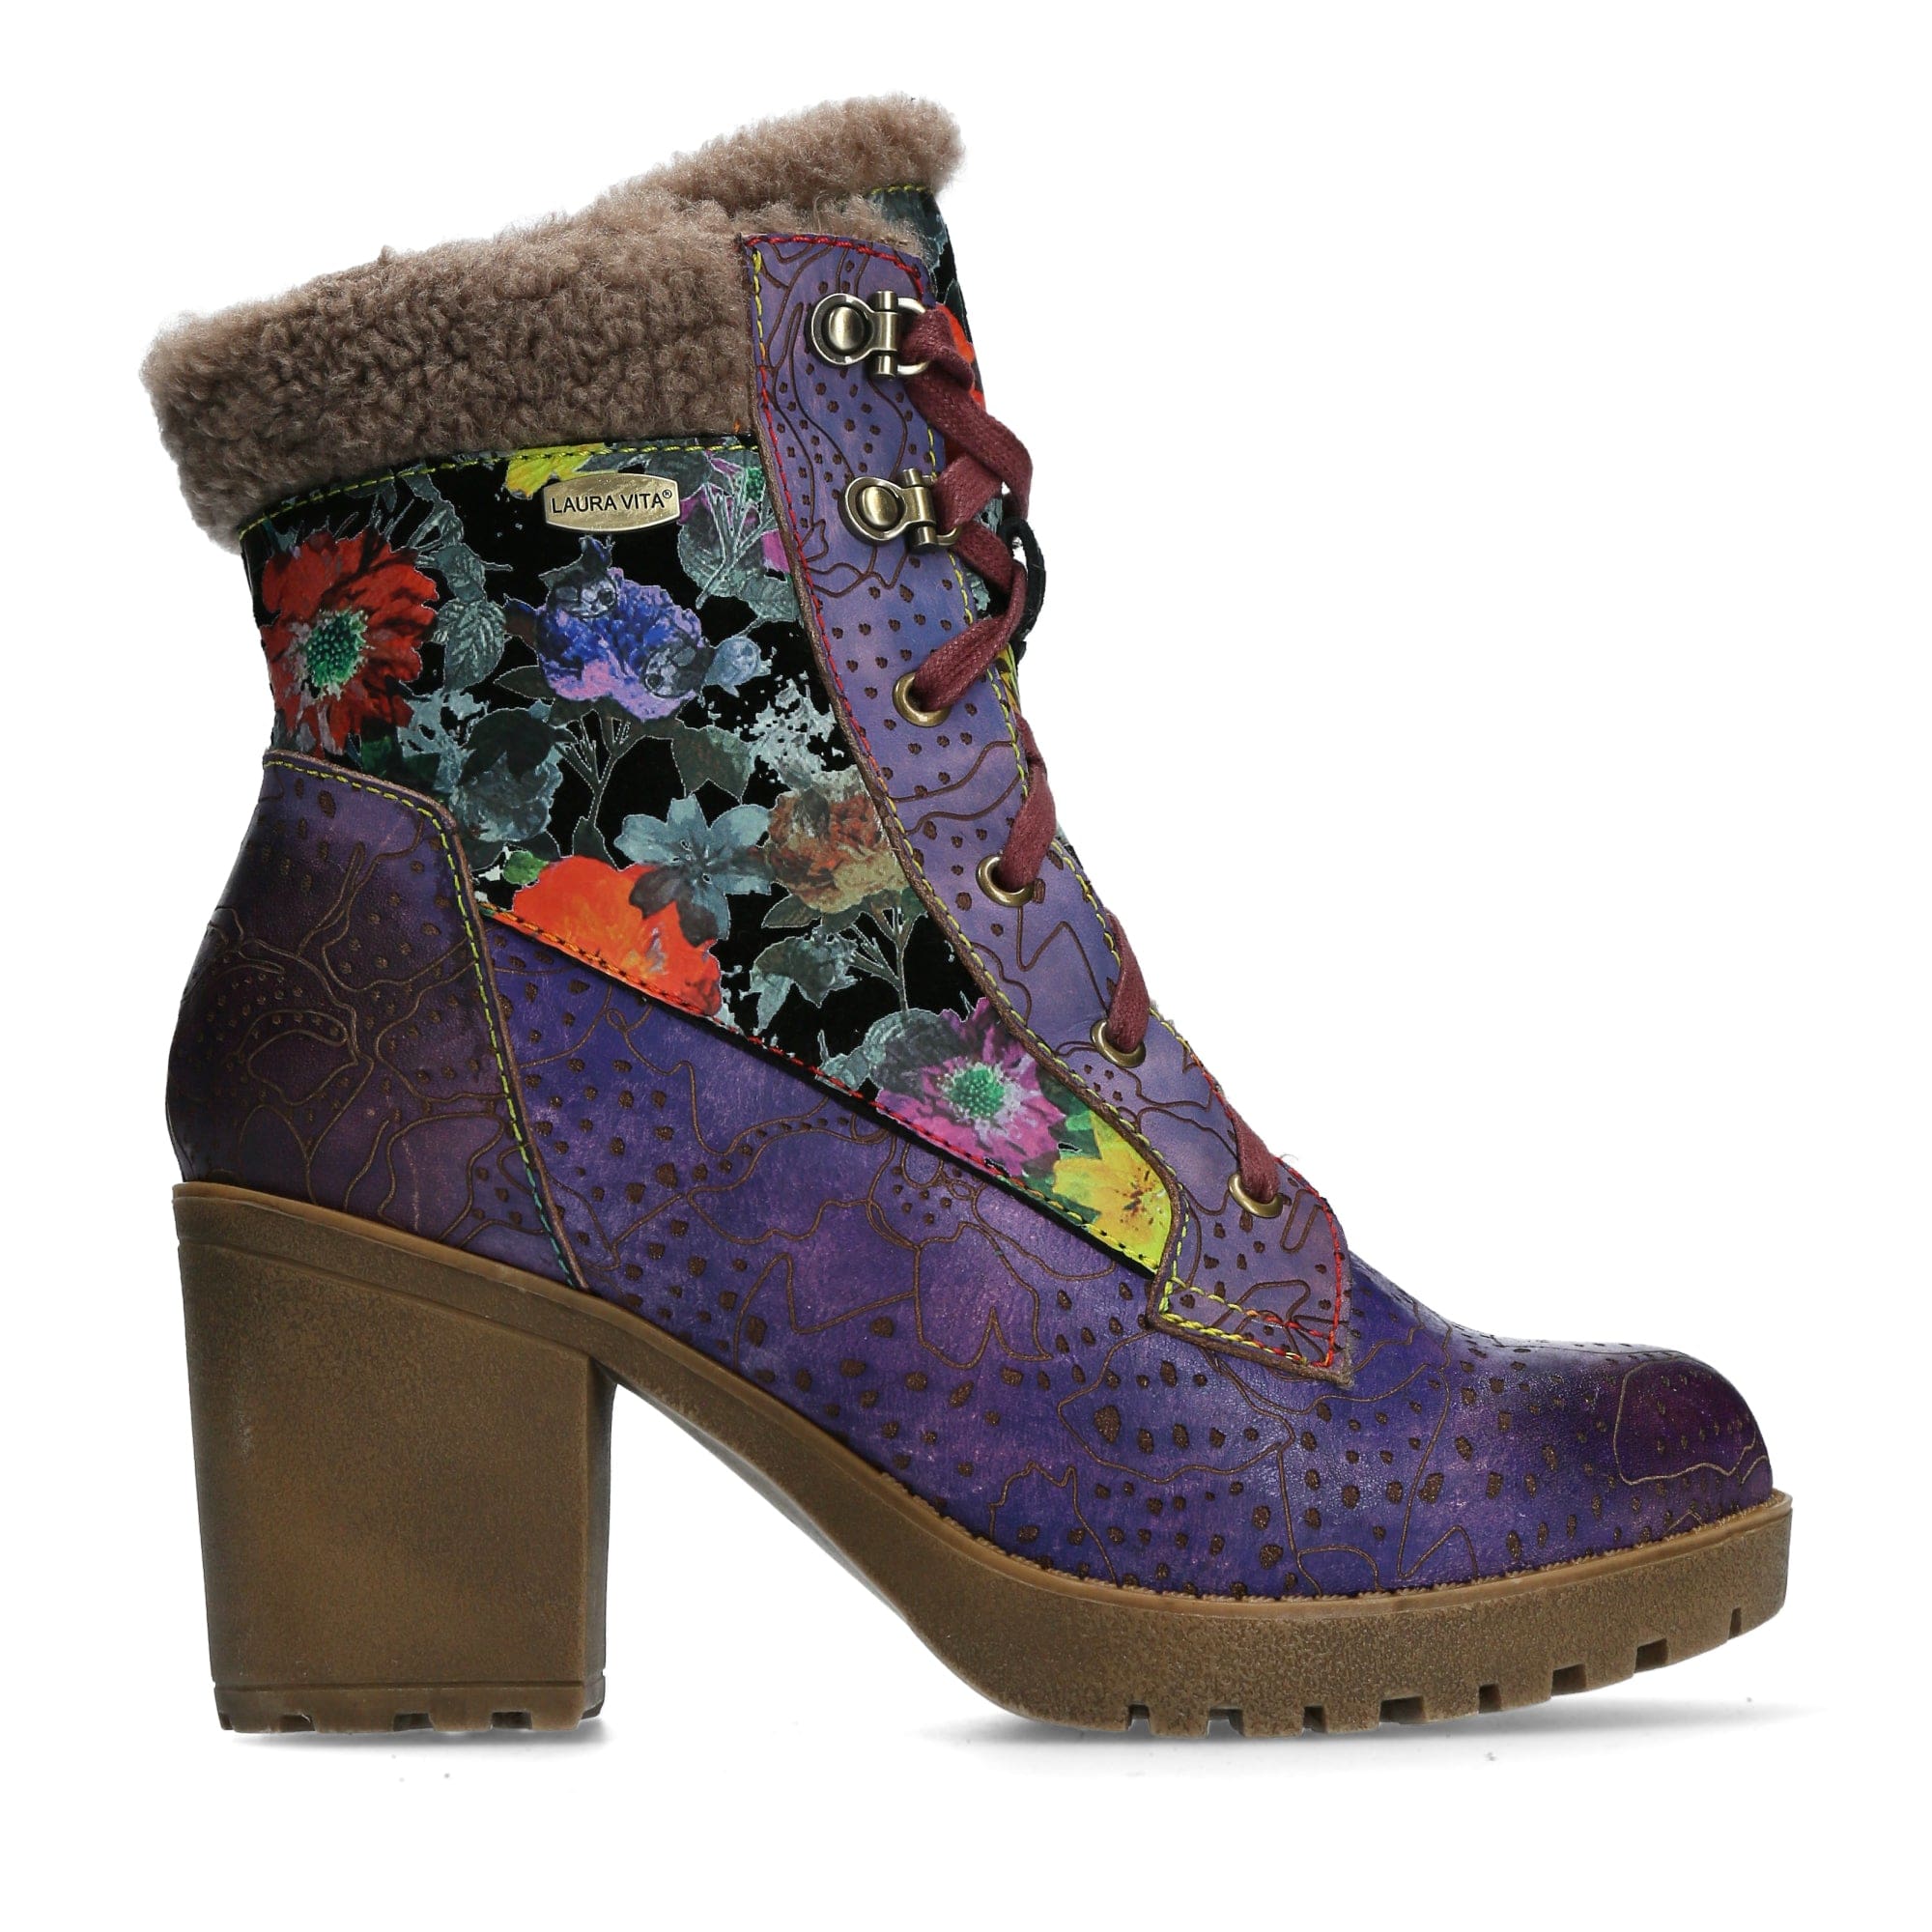 Chaussure KOKO 25 - 35 / Violet - Boots